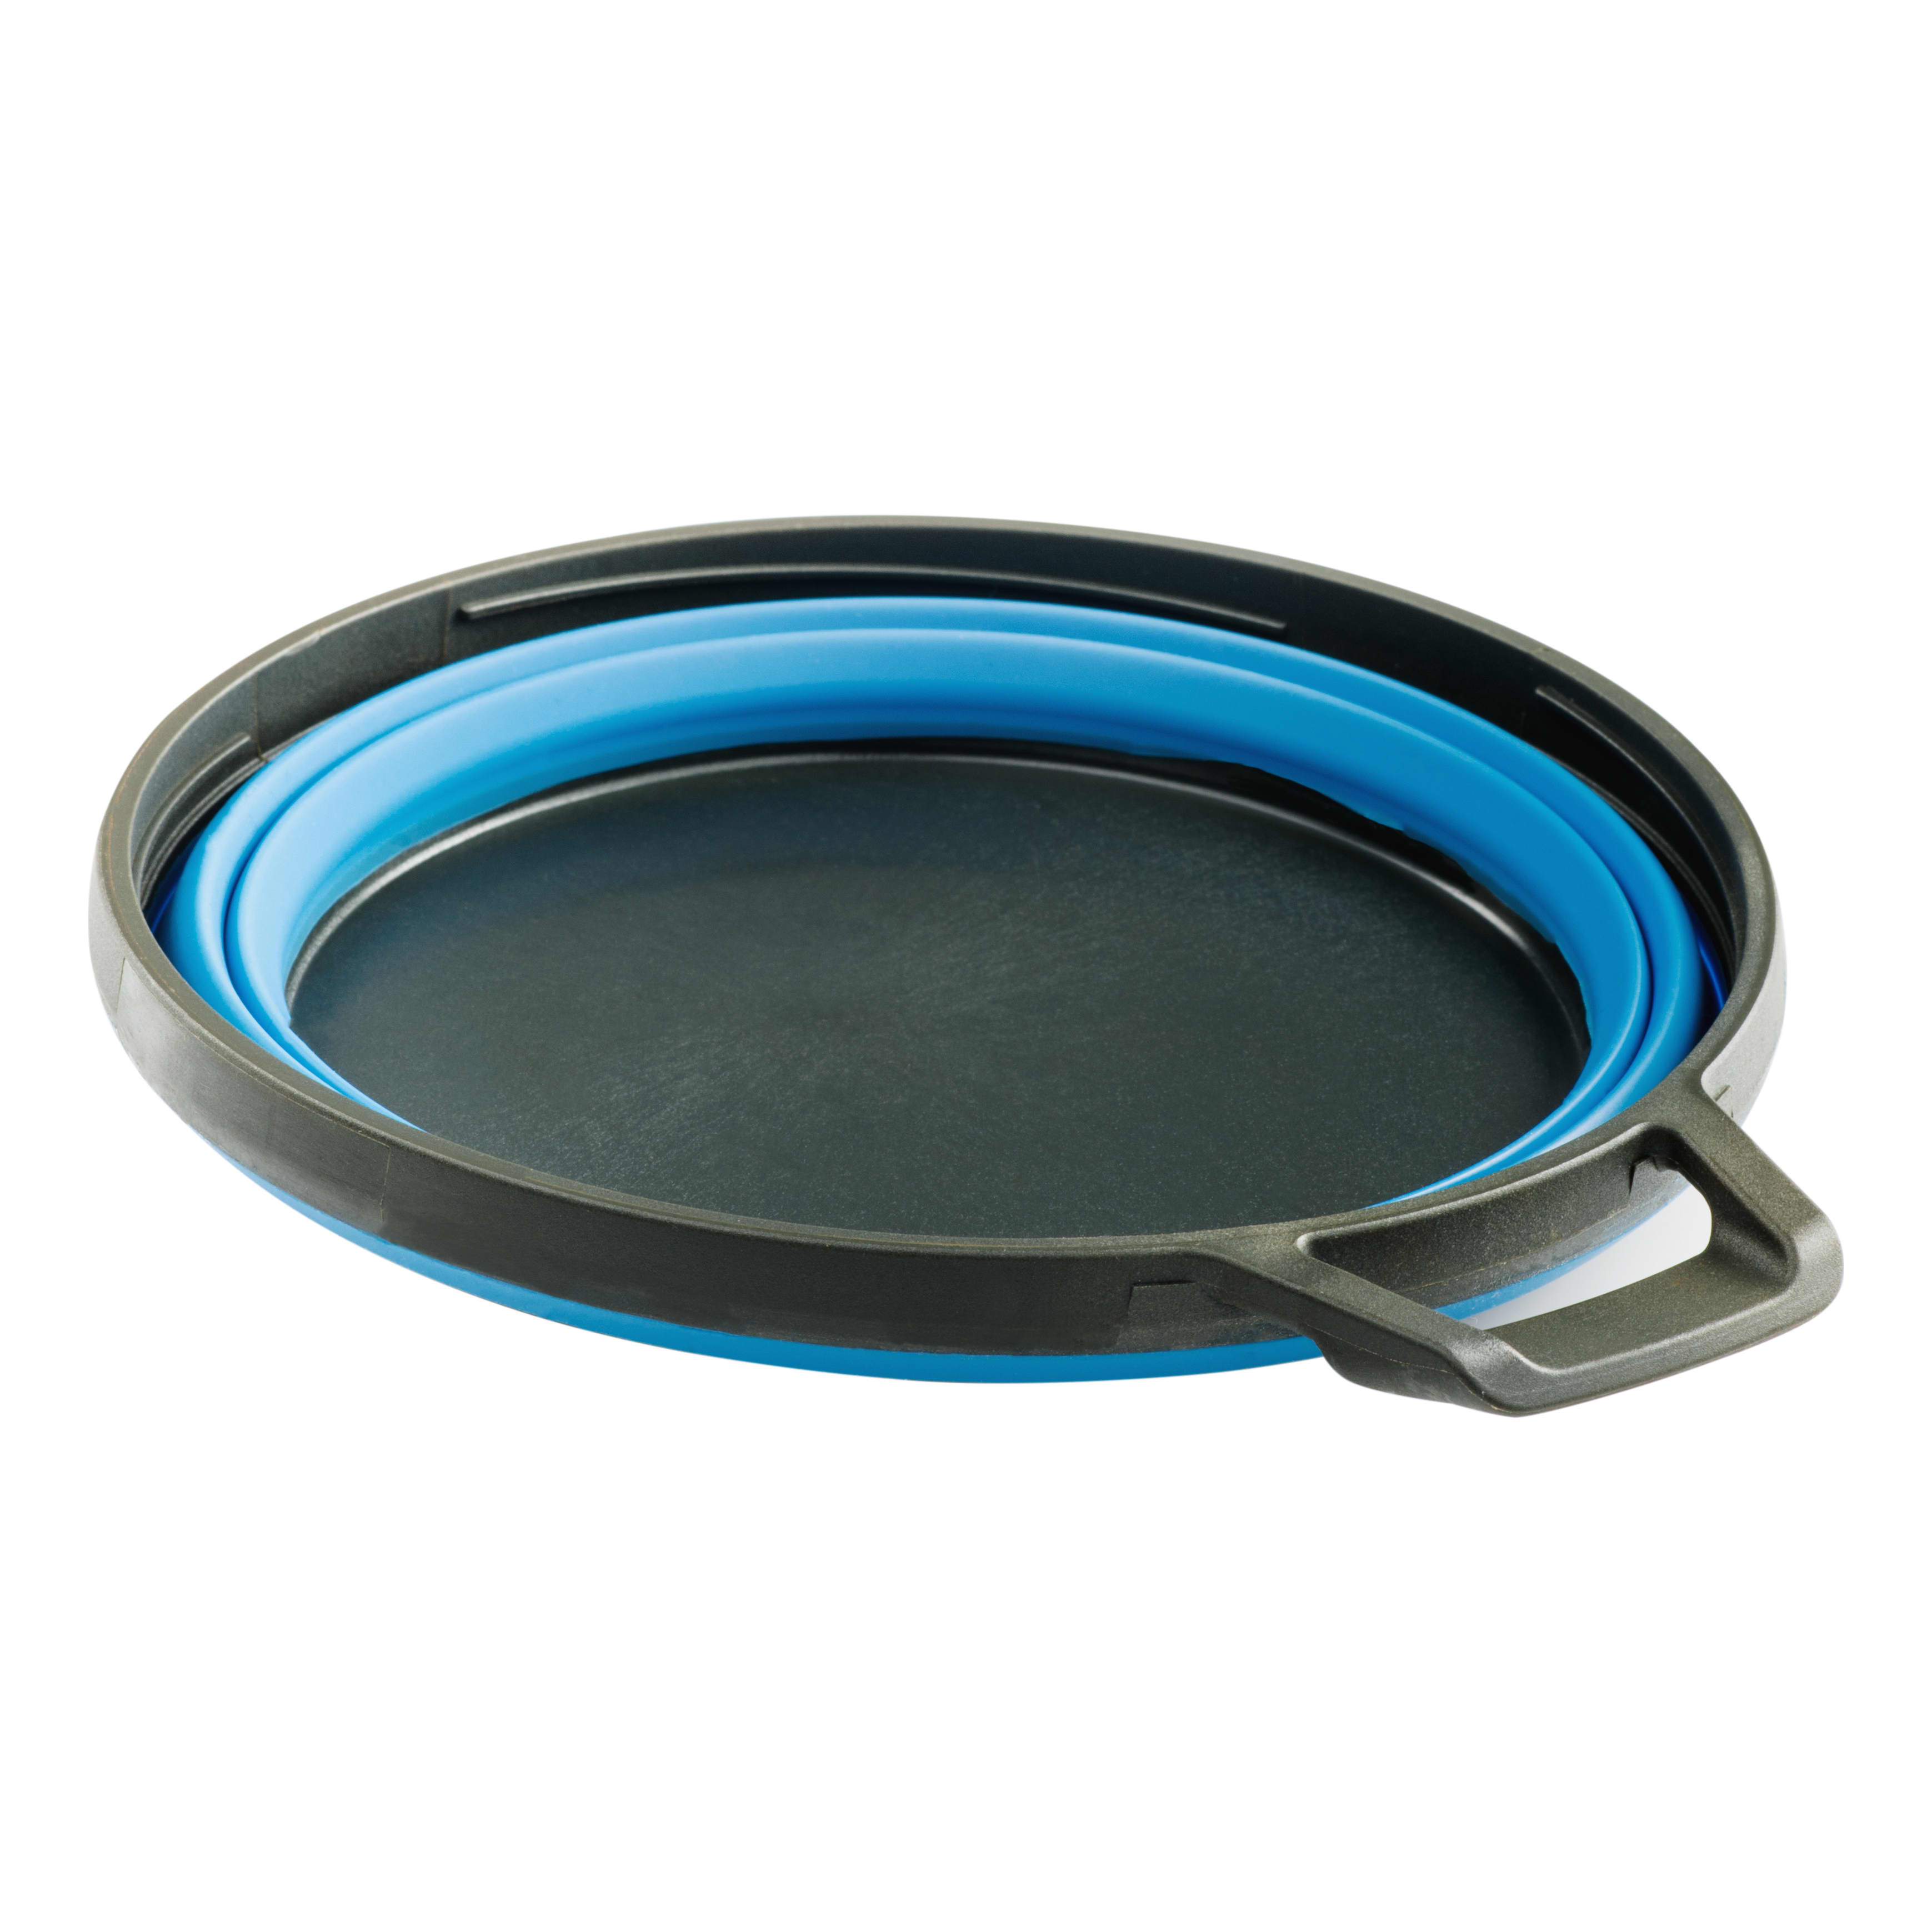 GSI Outdoors Escape Collapsible Bowl - Blue - Collapsed View